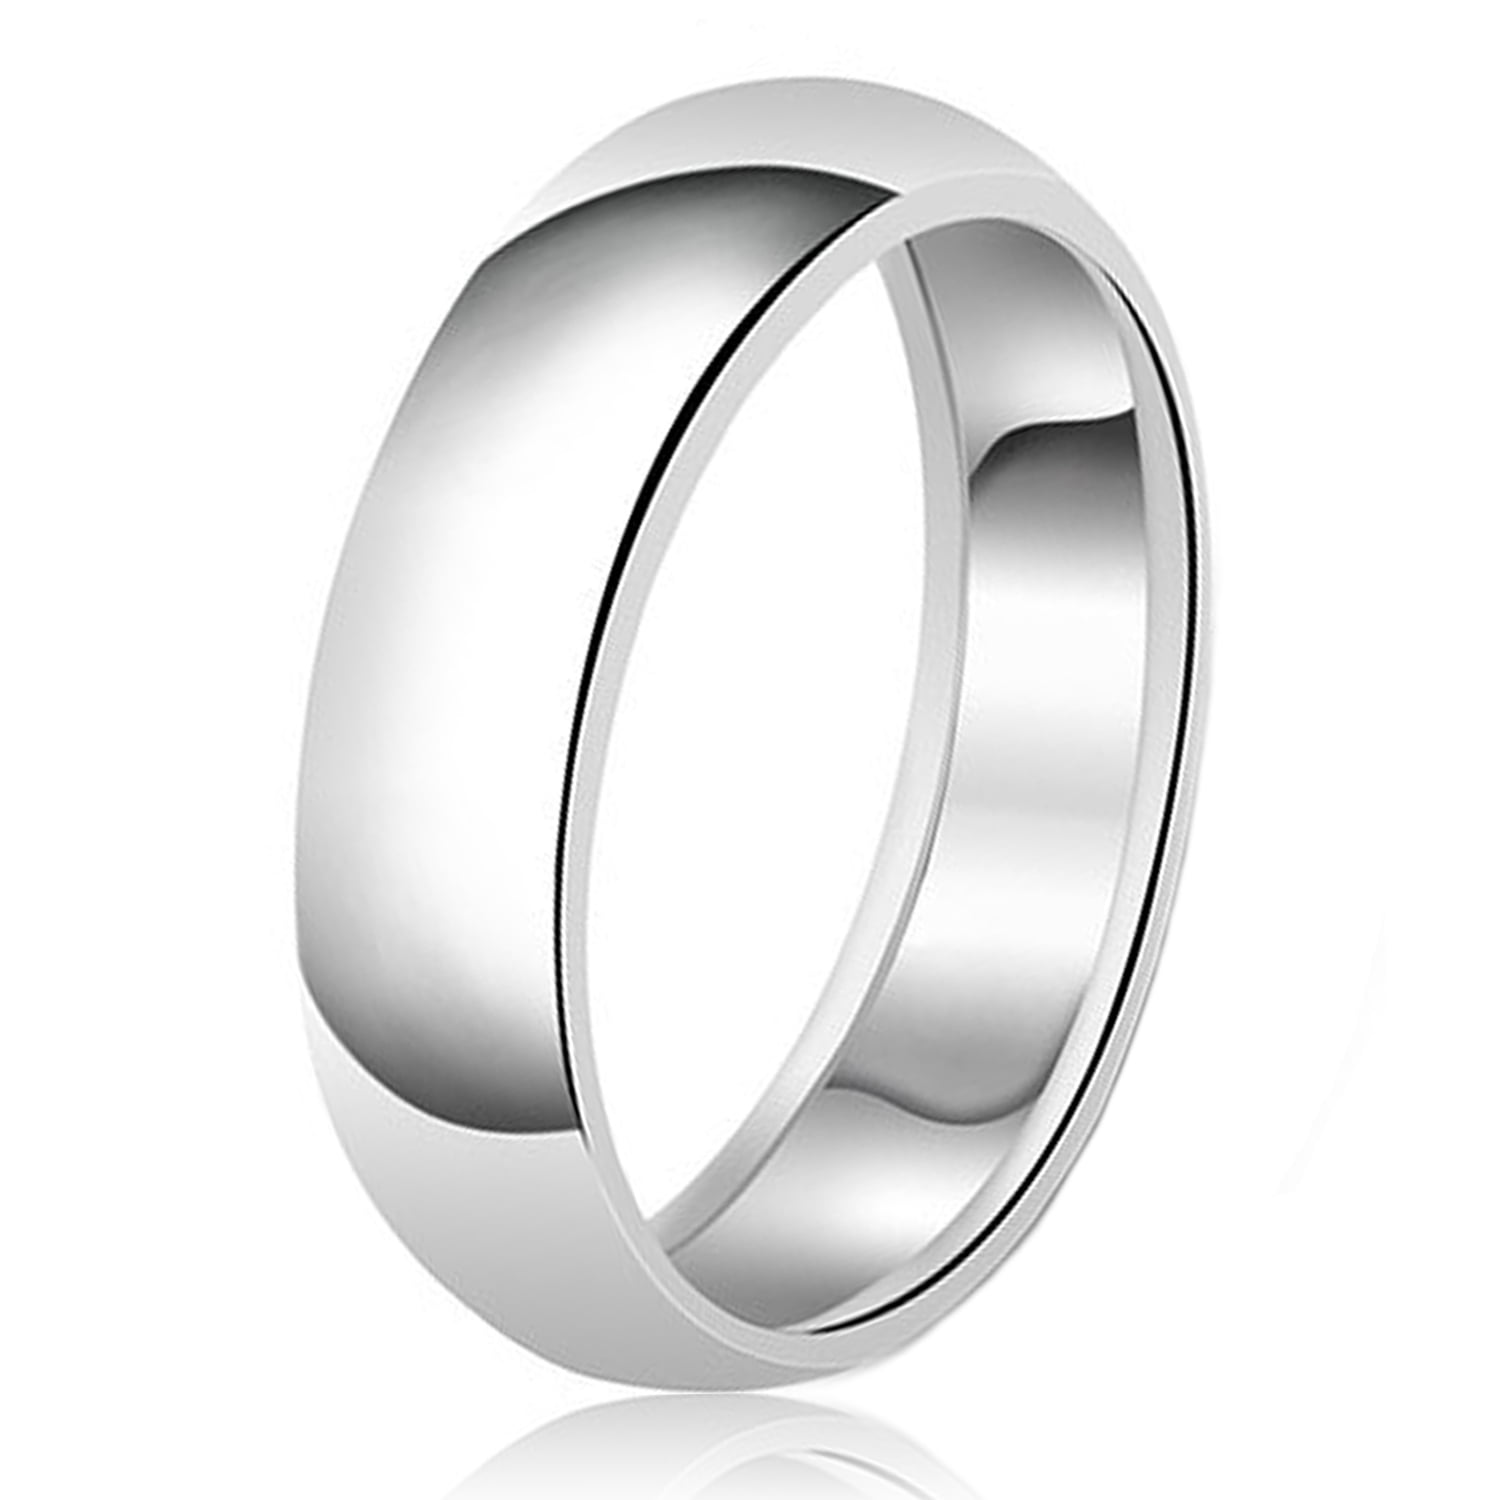 Flat Plain Solid Wedding Band 8 MM .925 Sterling Silver Ring Sizes 5-14